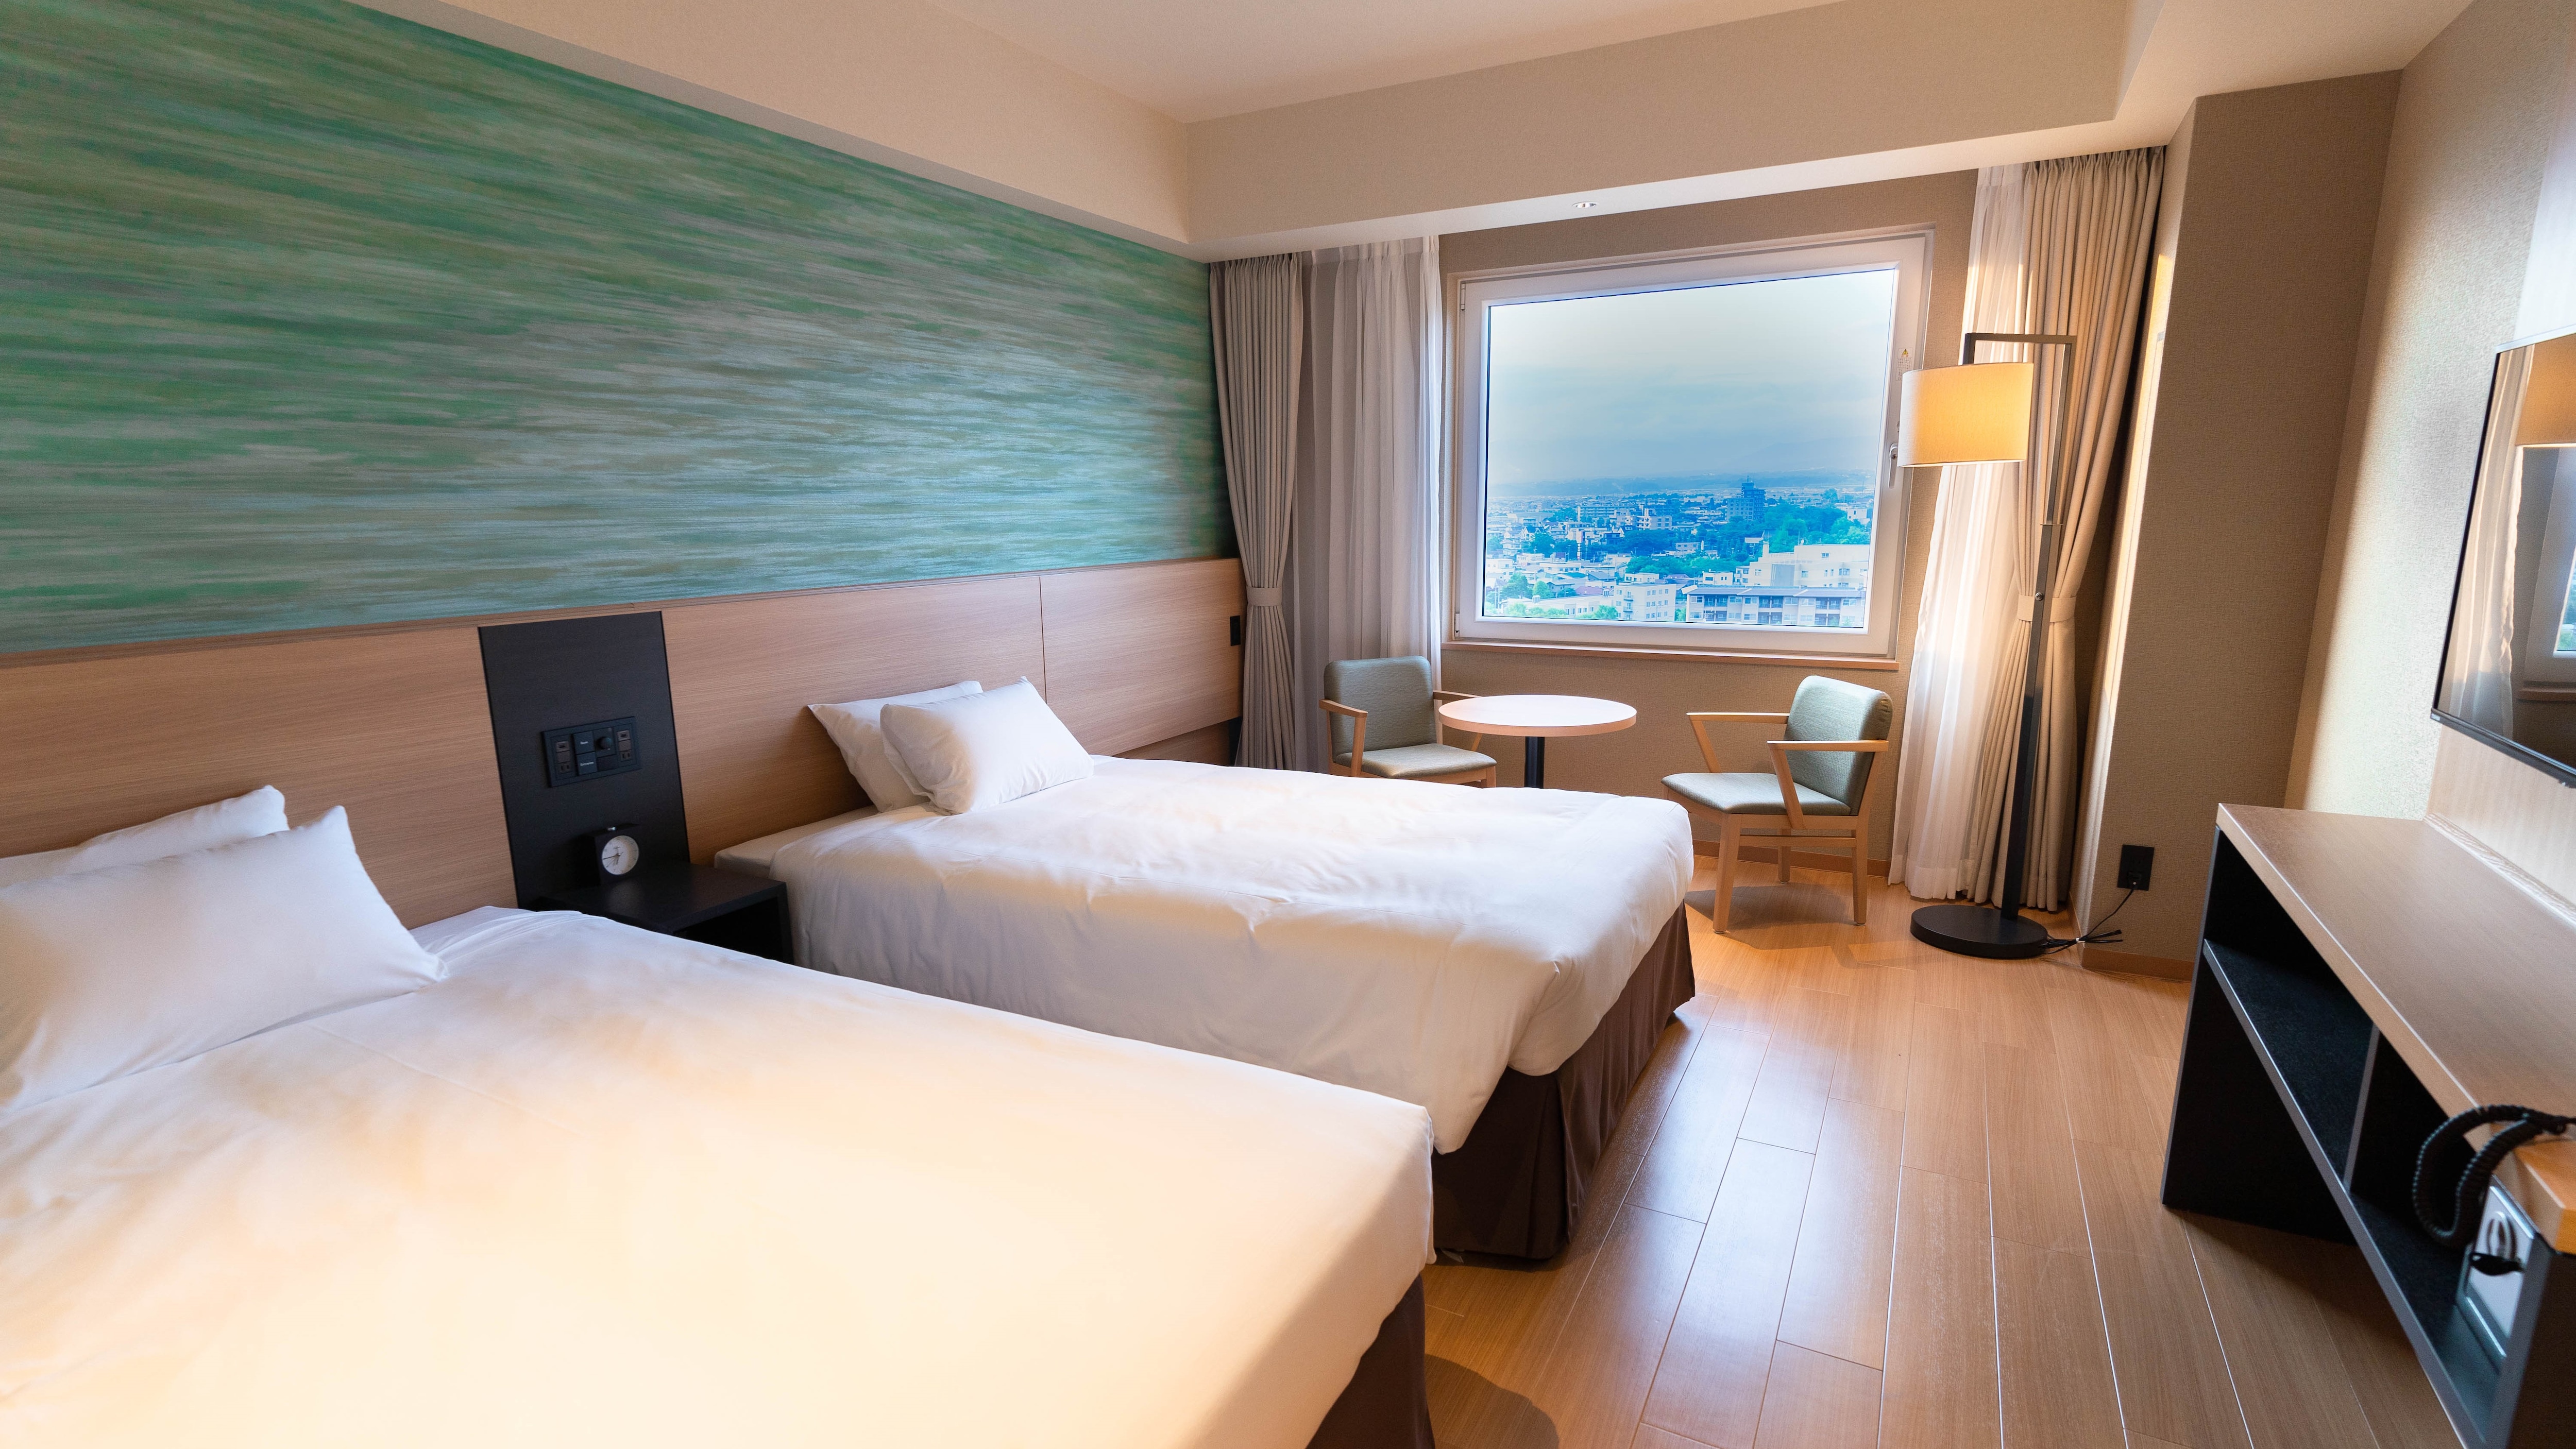 Healing guest room style with the image of Hakodate!